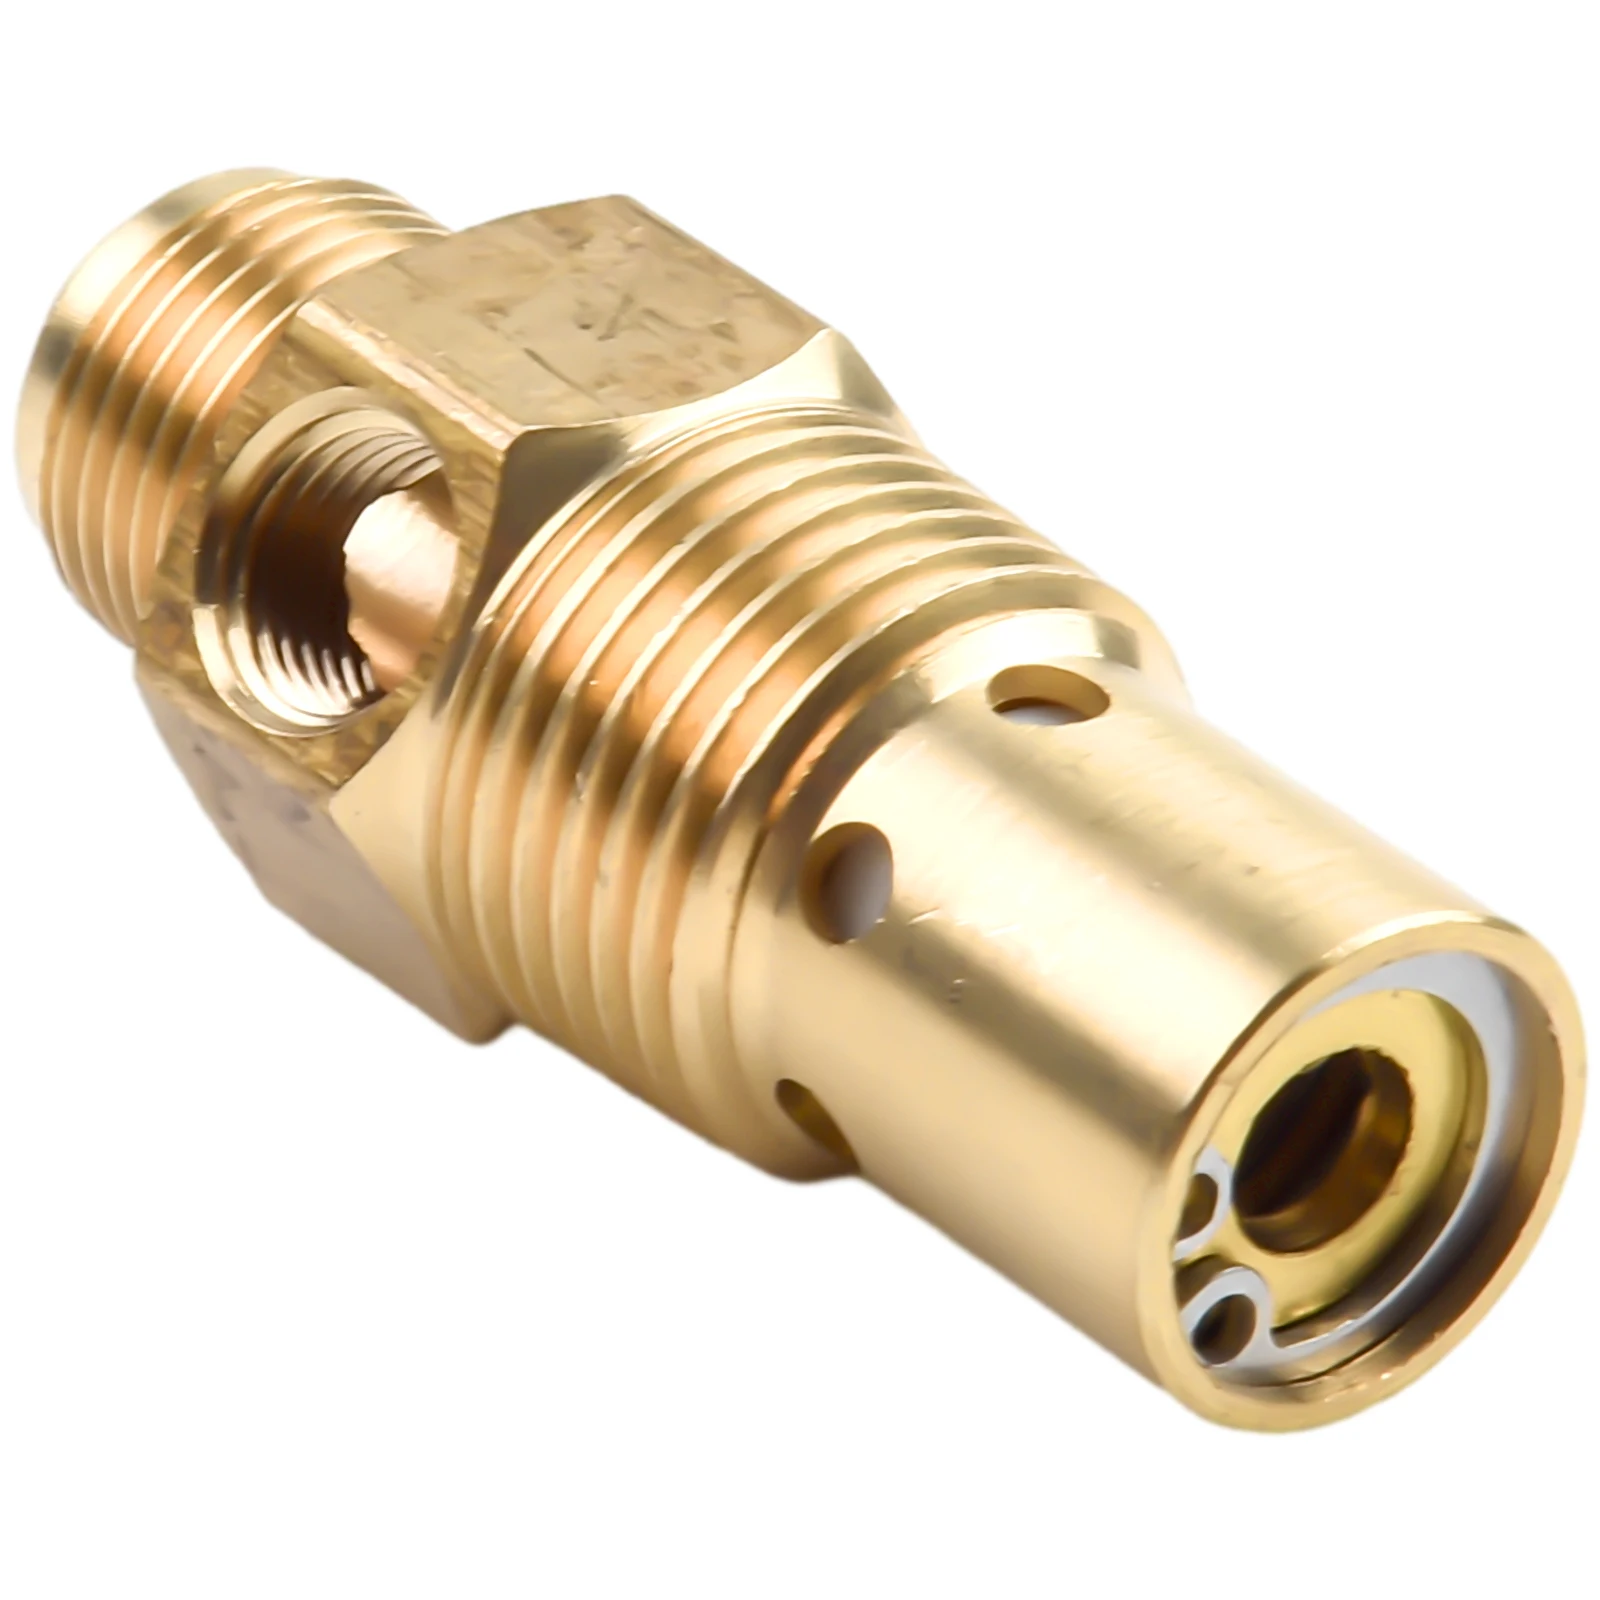 Brass Check Valve G3/8 Air Compressor Male Threaded NPT×1/2In For Air Compressor Replacement Radiator Check Valve 10 50 200 pcs brass pneumatic check valve 4 6 8 10 12mm od hose single way for air and gas ideal for compressor pipe fittings